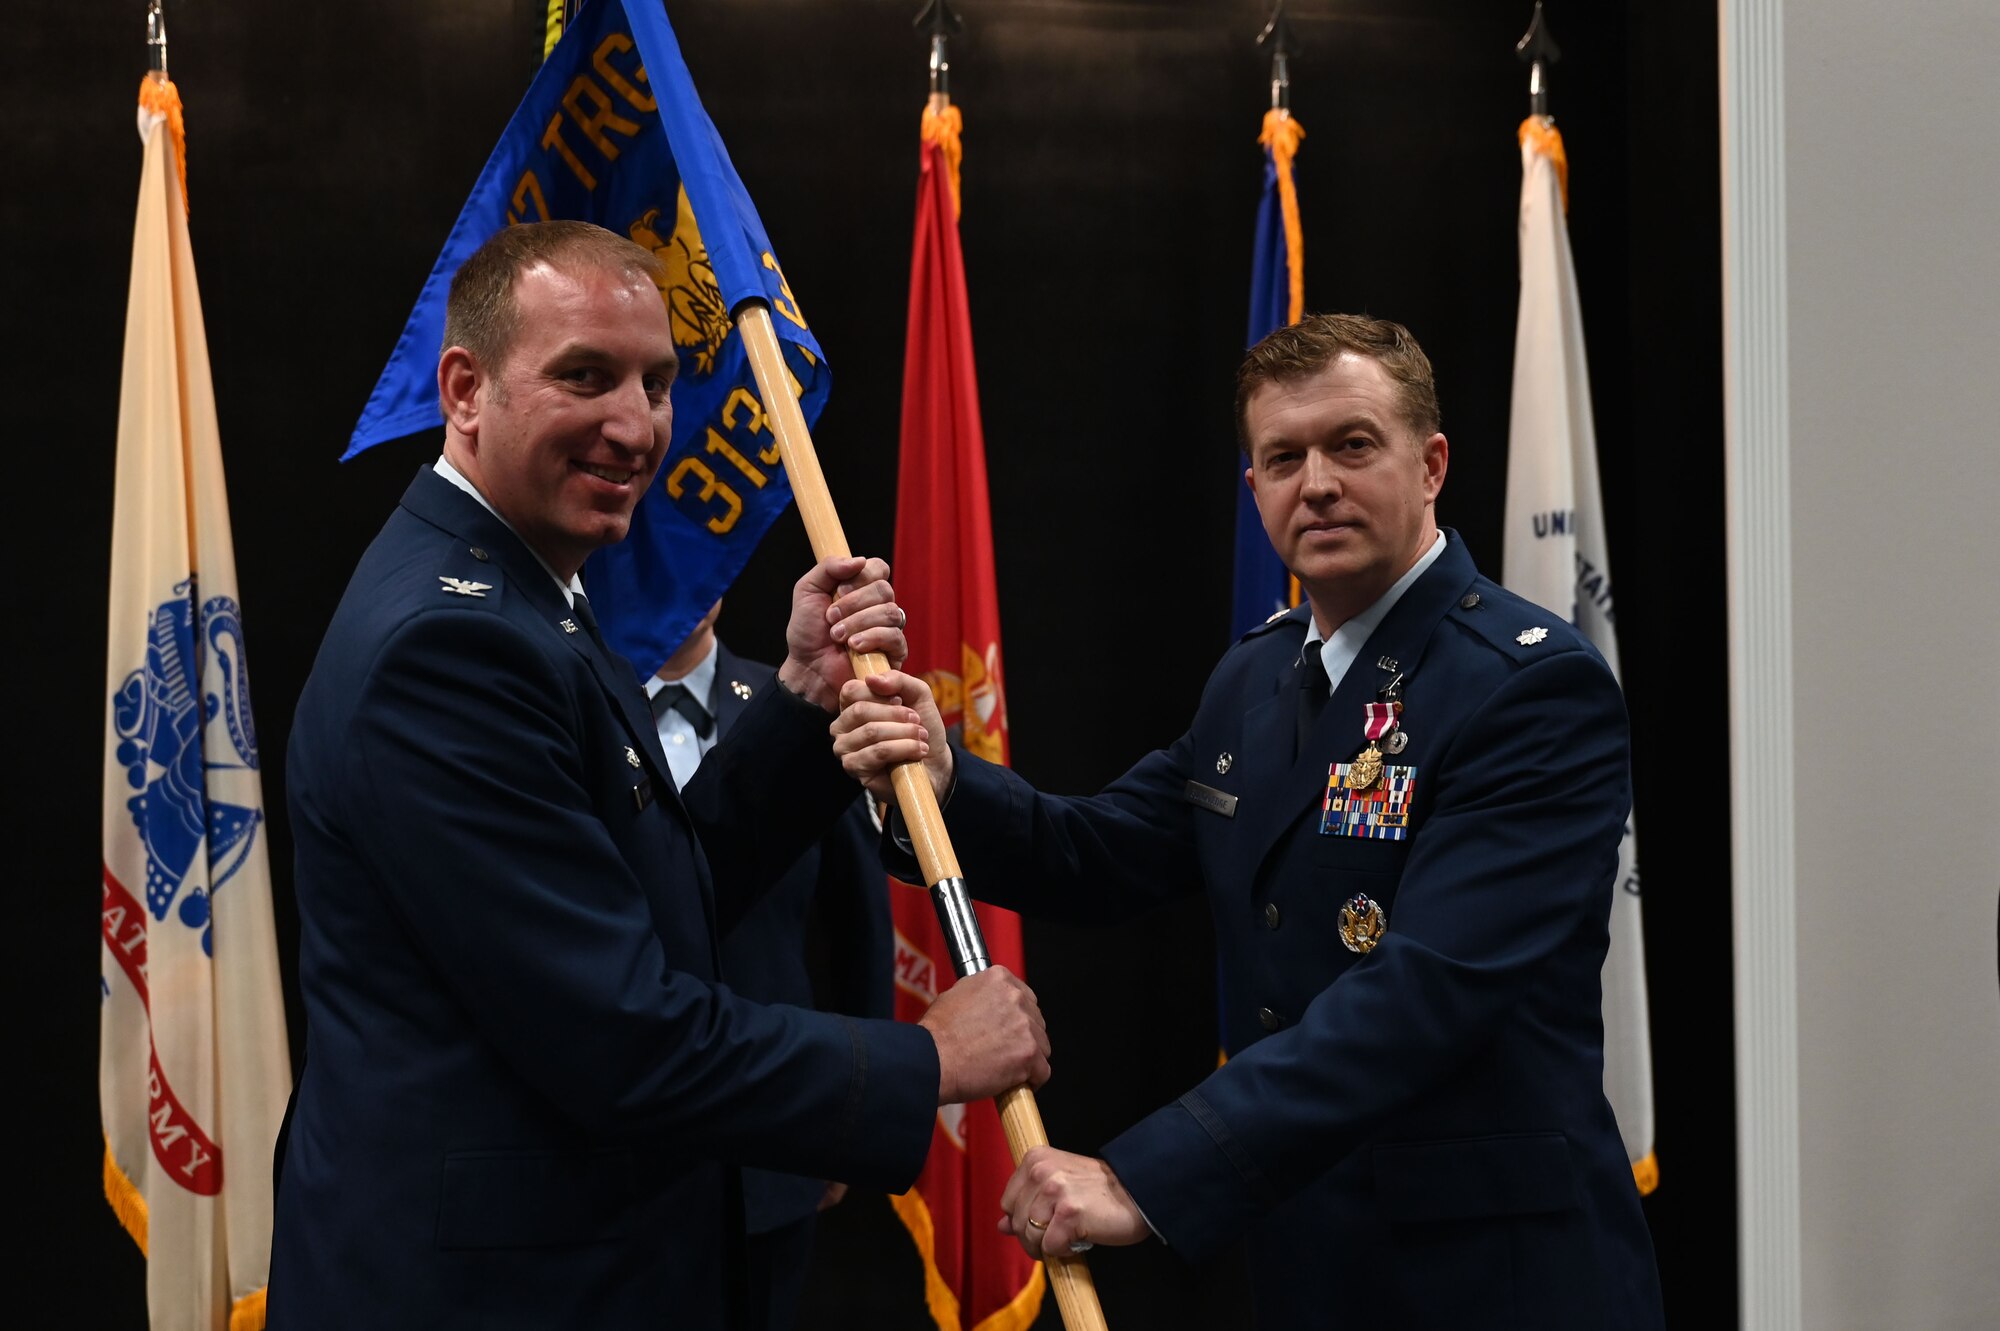 U.S. Air Force Col. Jason Kulchar, 17th Training Group commander, takes the guidon from Lt. Col. Daniel Blackledge, outgoing 313th Training Squadron commander, during the change of command ceremony at the Powell Event Center, Goodfellow Air Force Base, Texas, June 9, 2023. Passing the guidon represents the transfer of leadership responsibilities to the next commander. (U.S. Air Force photo by Airman 1st Class Madison Collier)